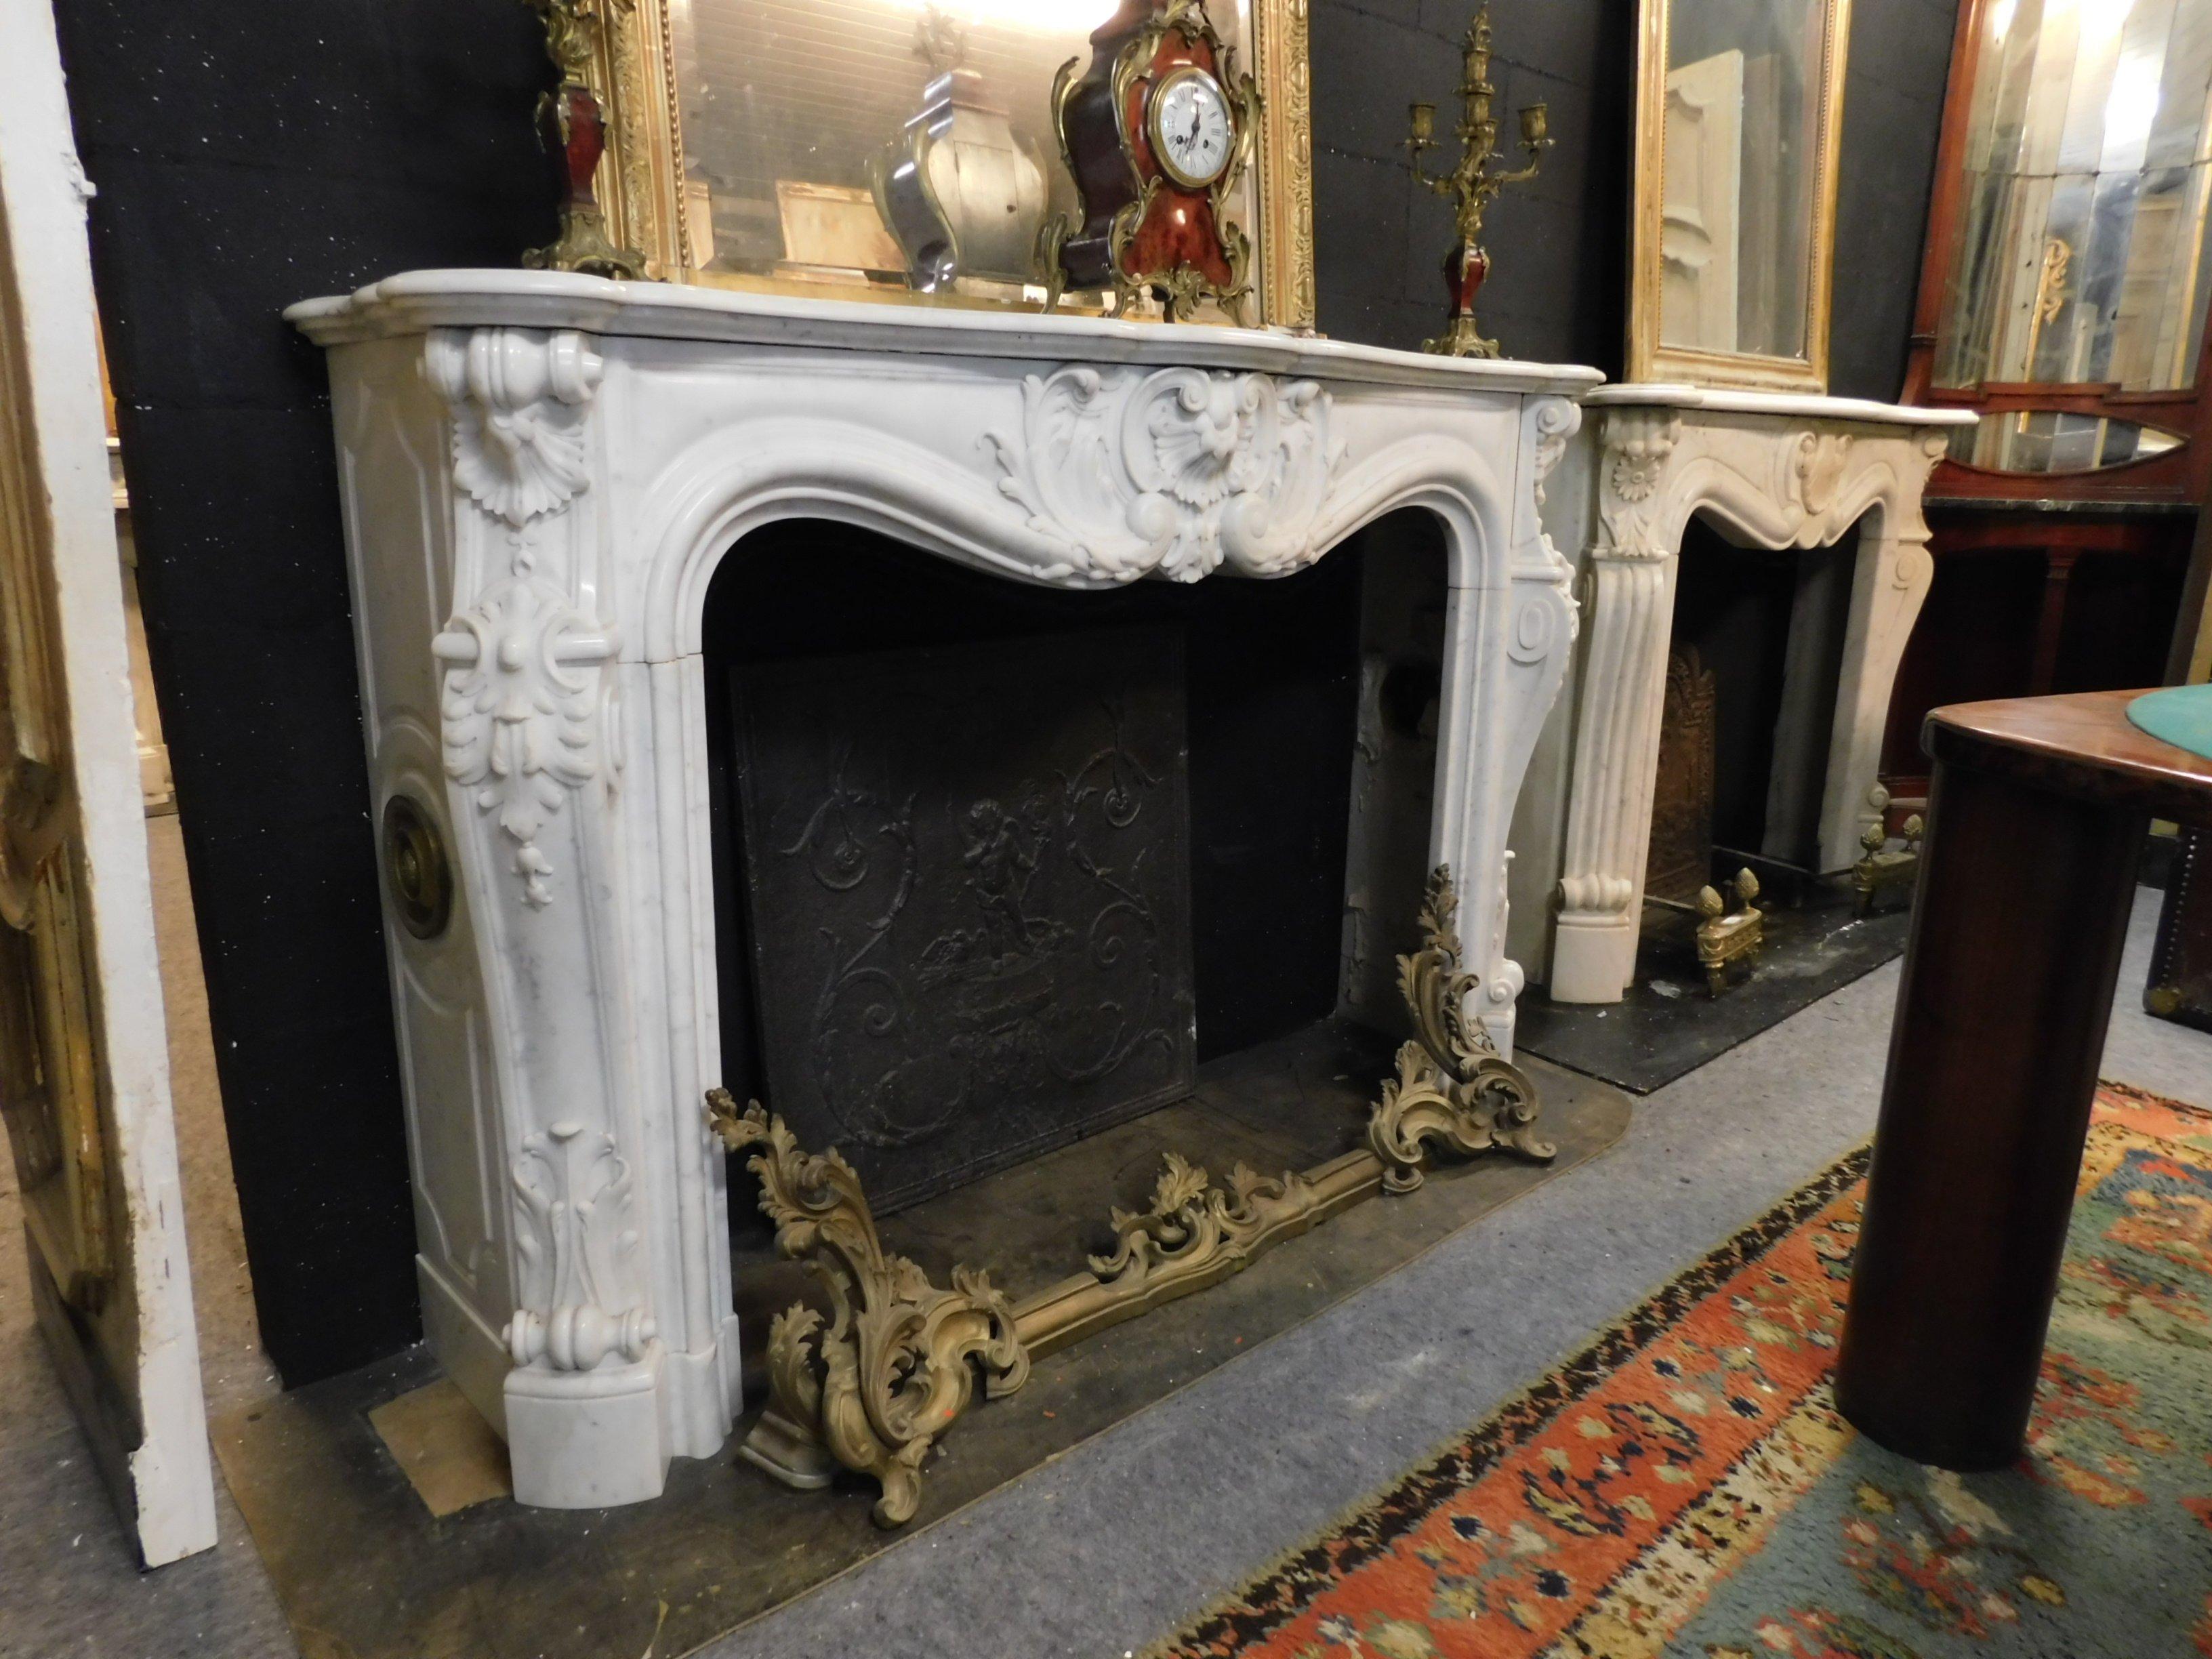 Carrara Marble Antique Louis XV Fireplace, Richly Carved White Marble, 1700 Paris 'France'